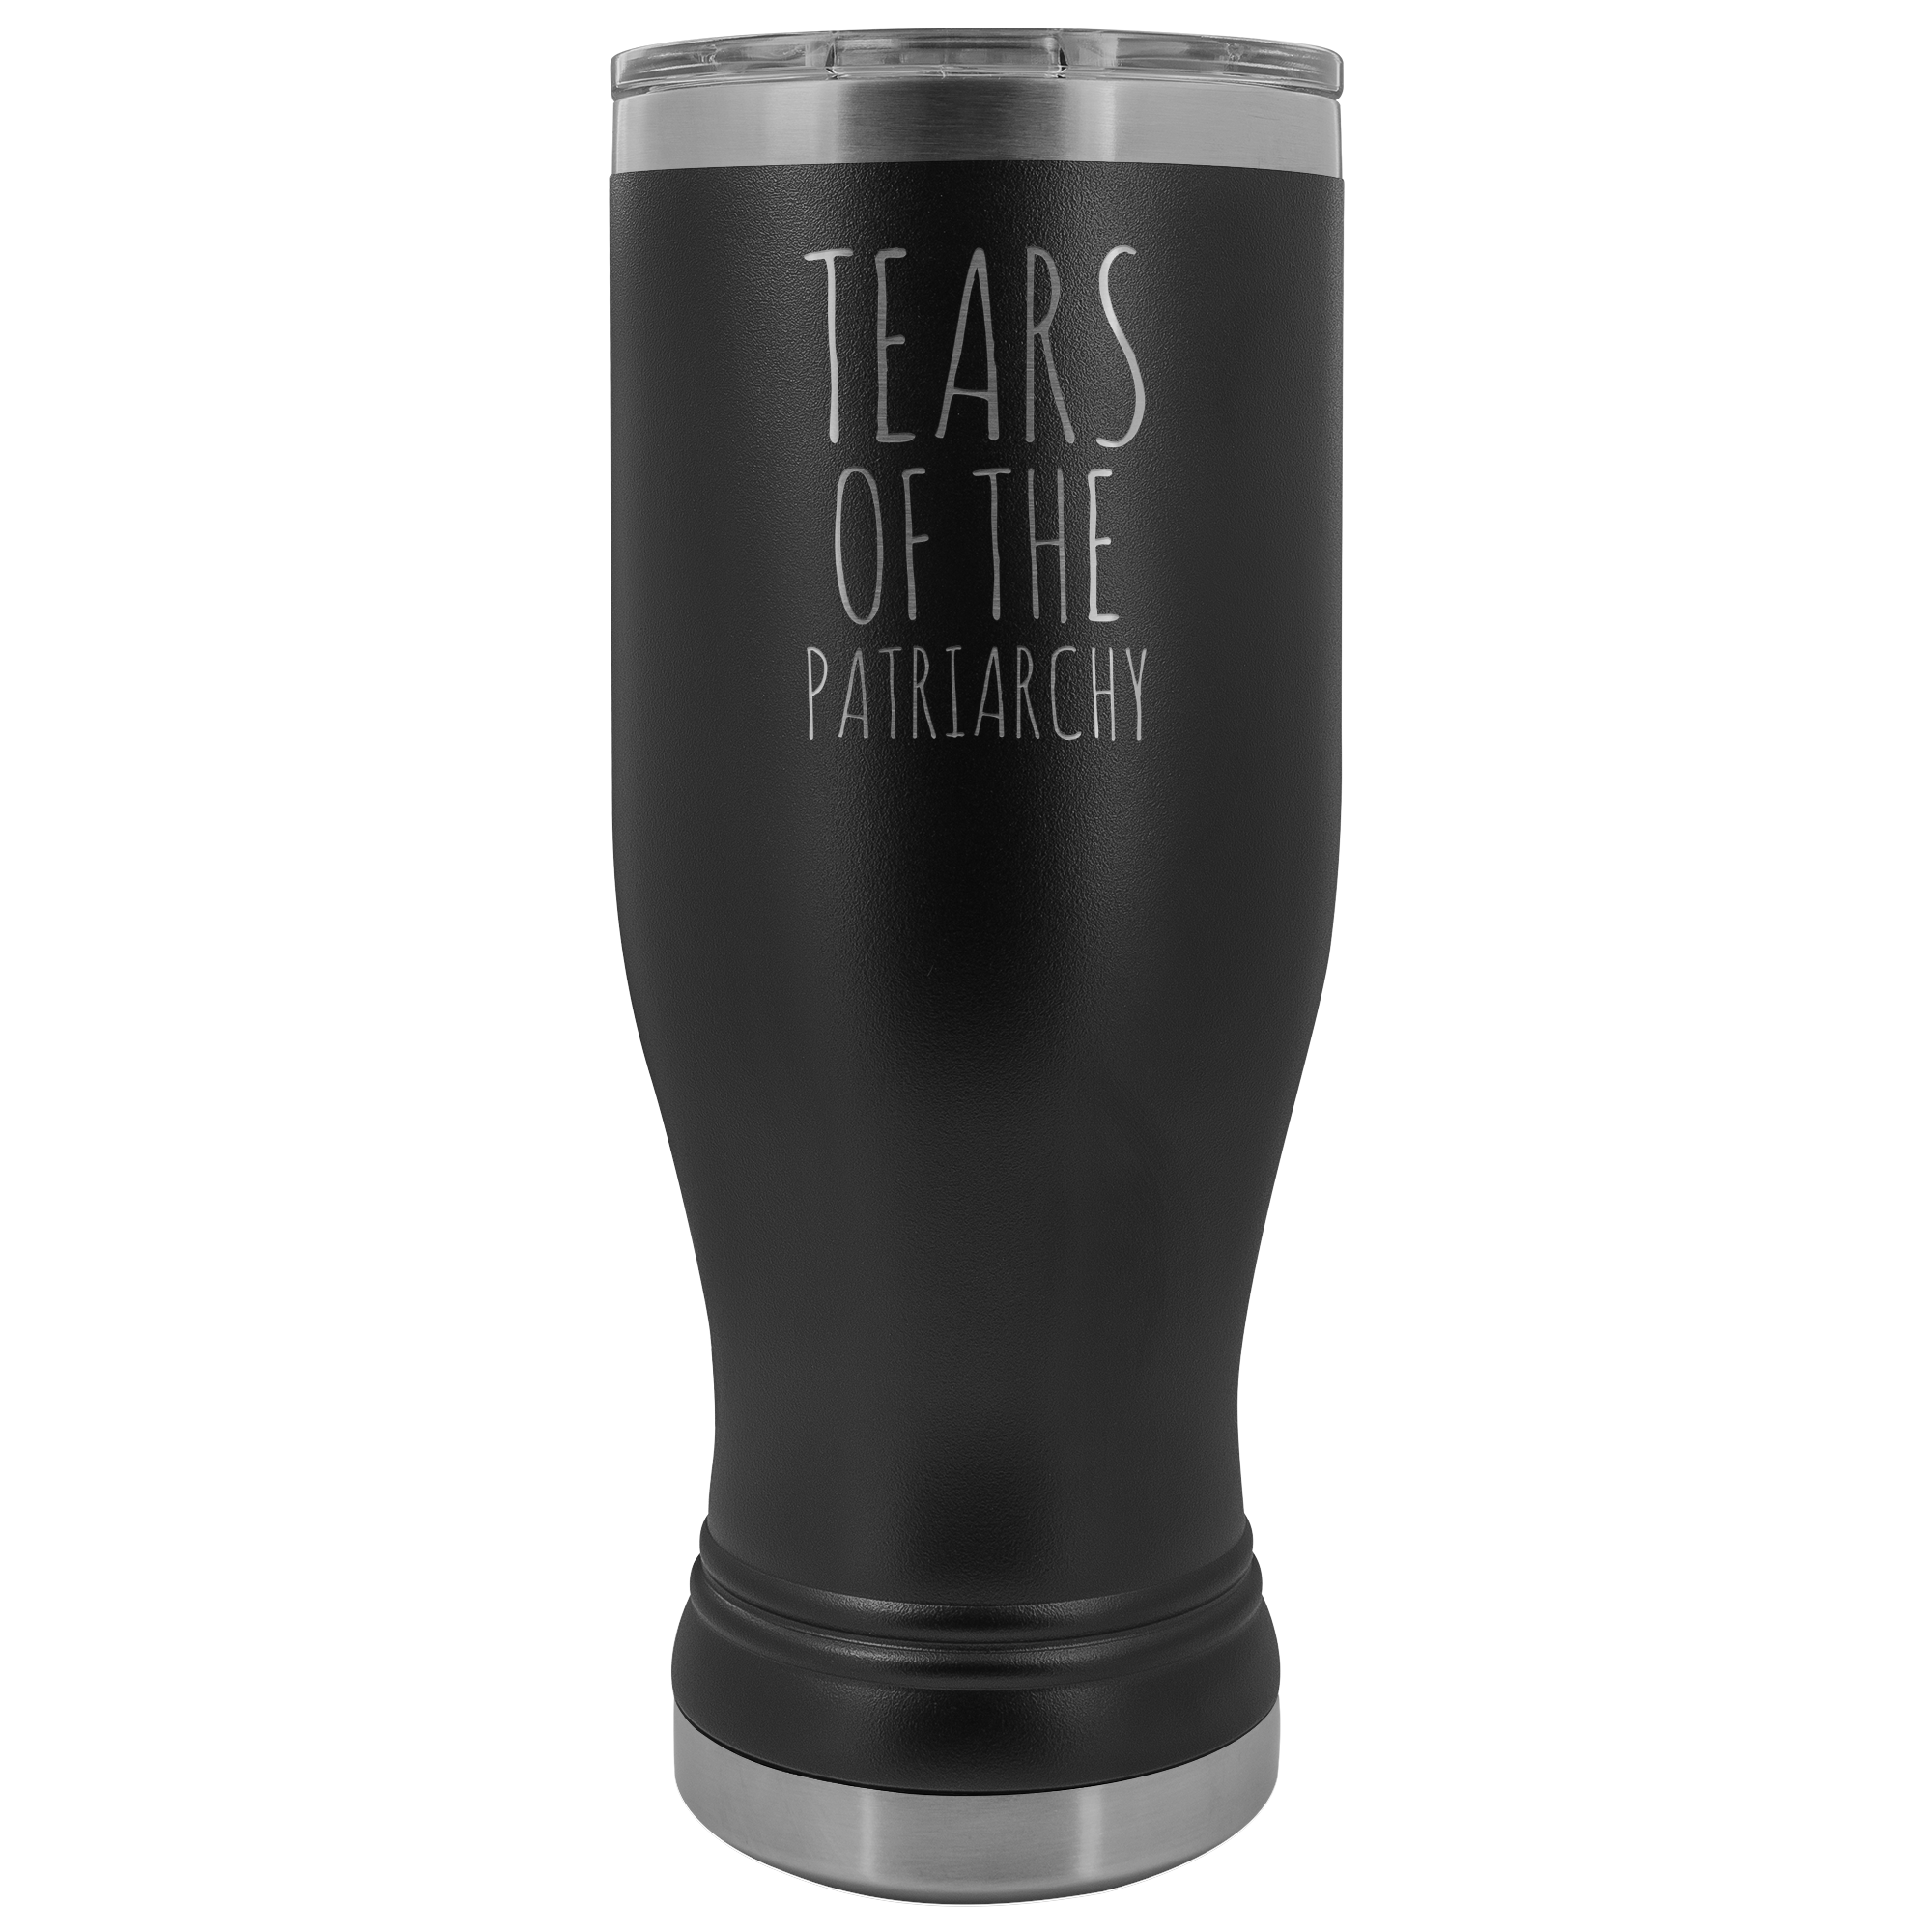 Tears of the Patriarchy Pilsner Tumbler Feminist Mug Insulated Hot Cold Travel Coffee Cup 20oz BPA Free